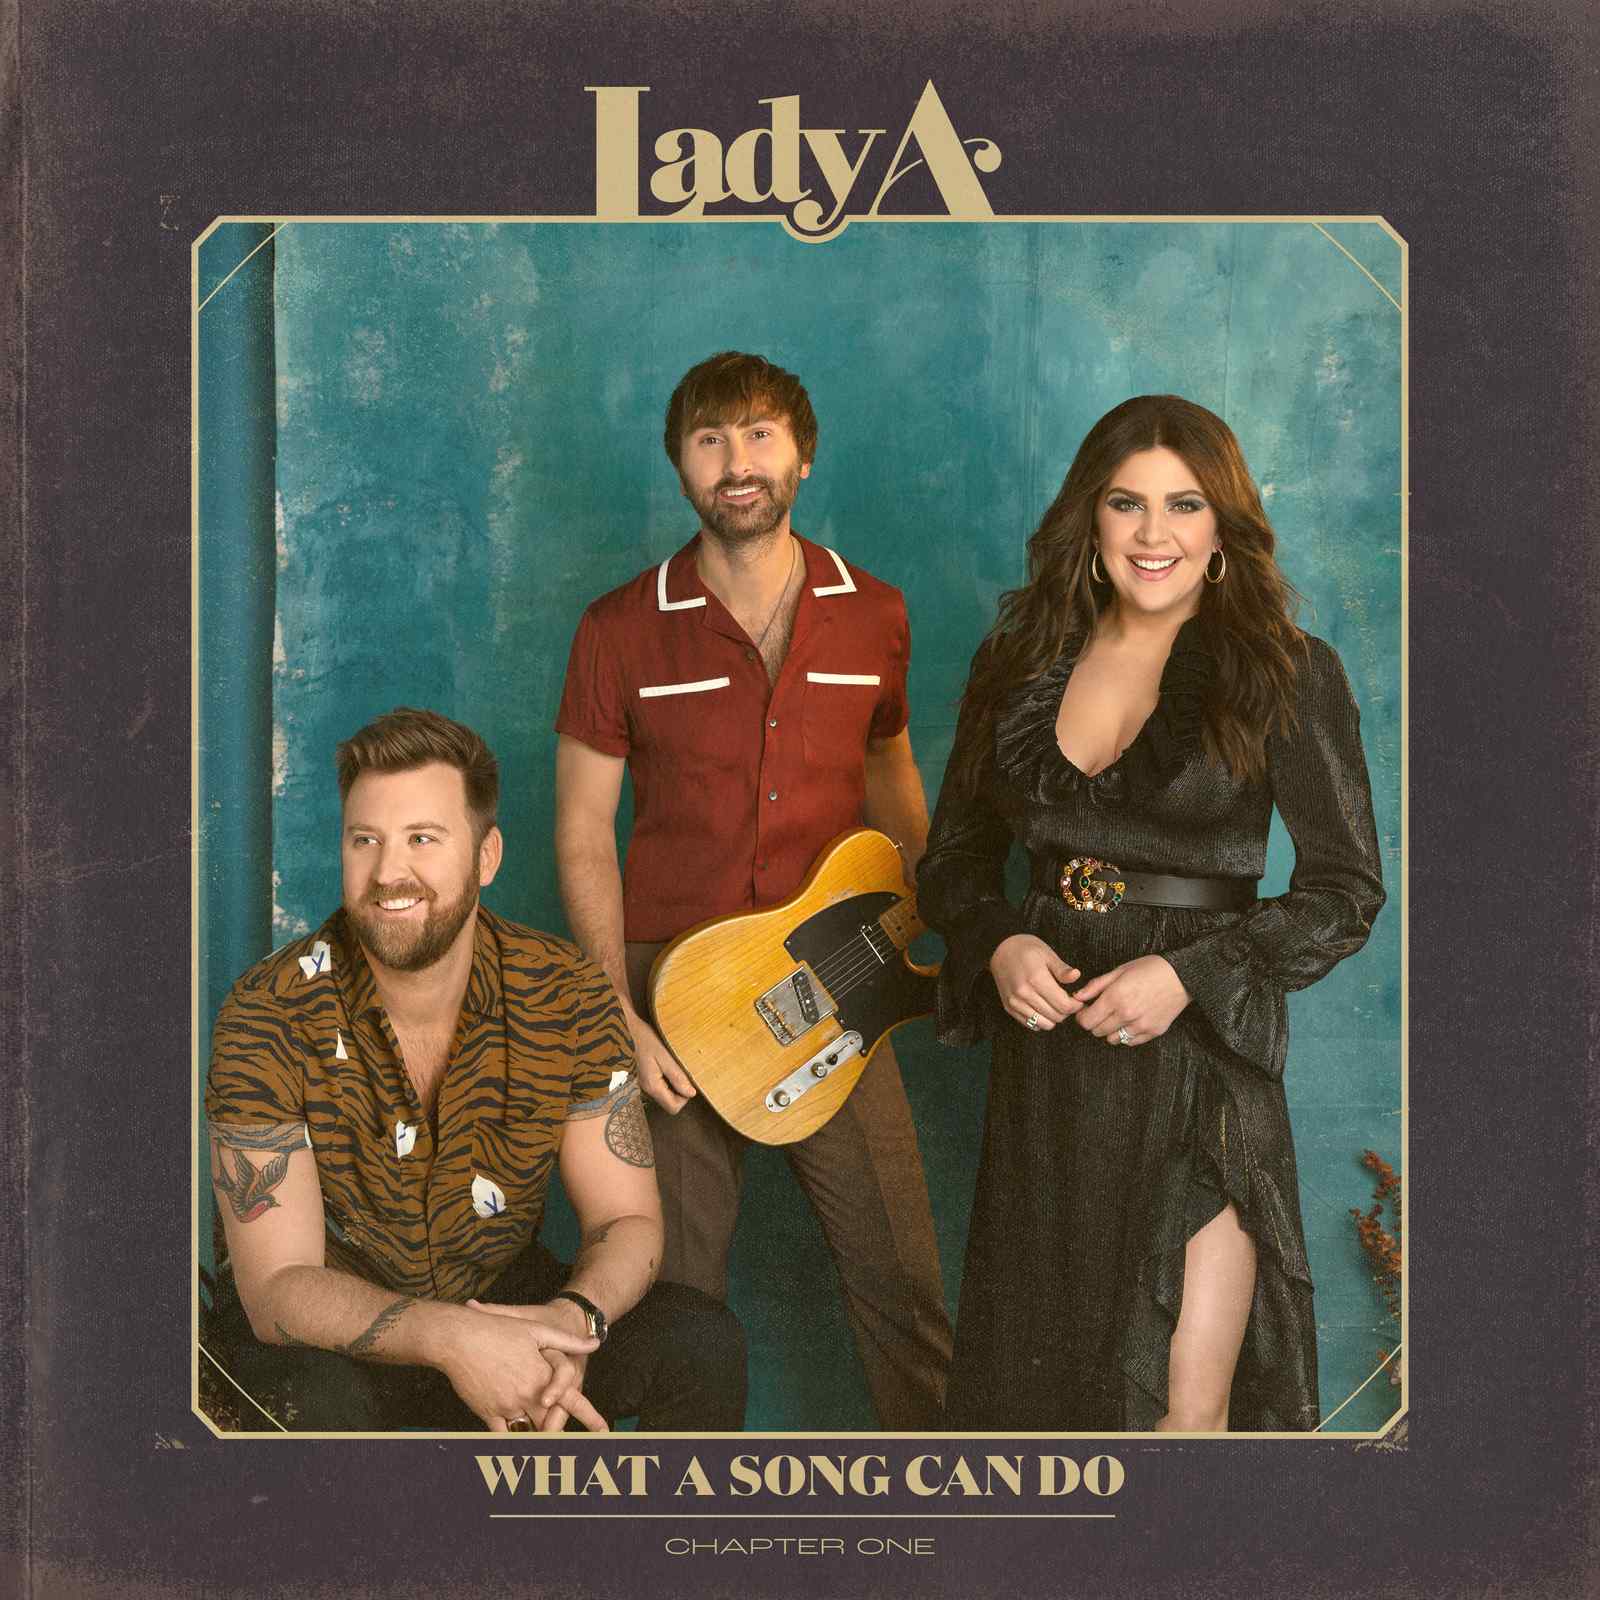 What A Song Can Do (Chapter 1) by Lady A